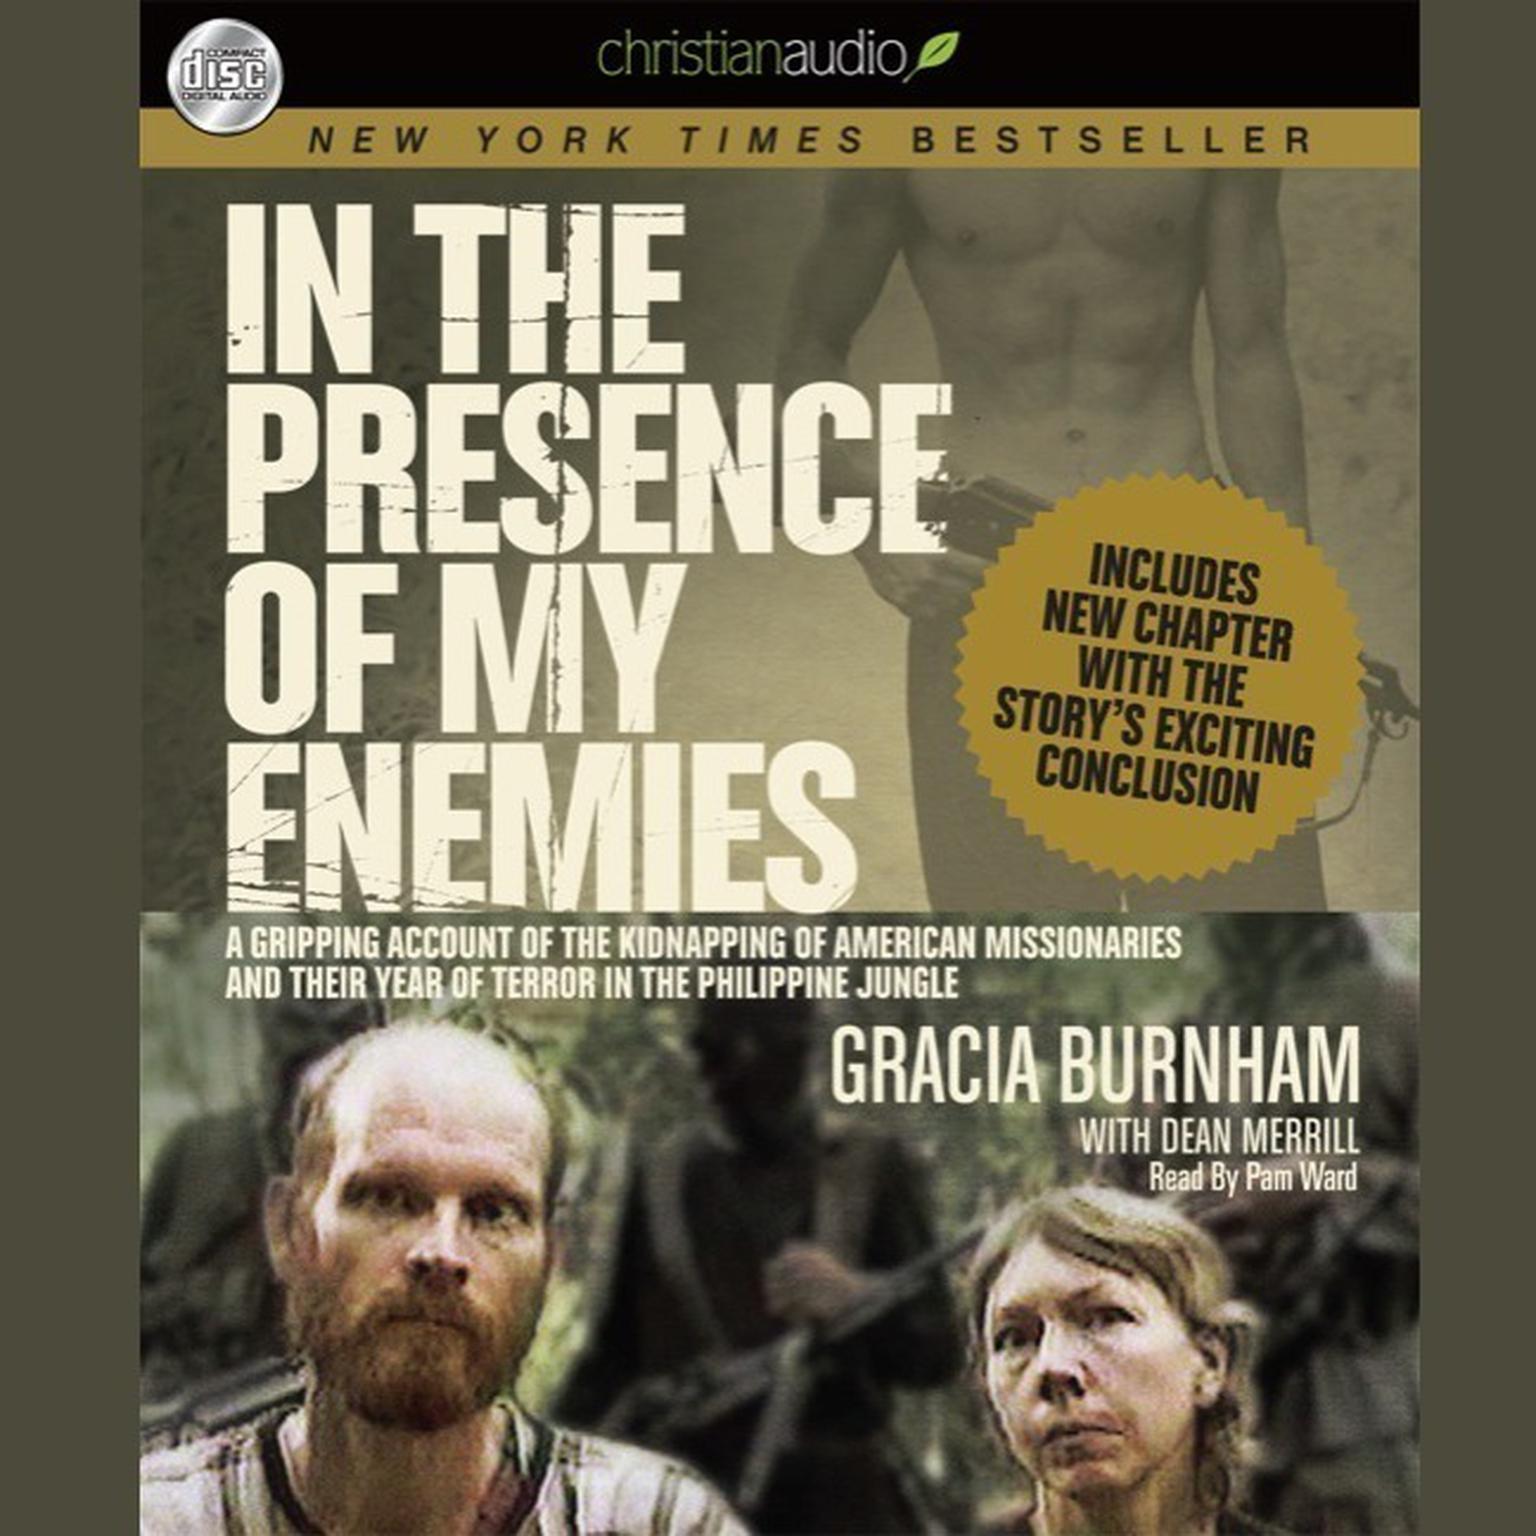 In the Presence of My Enemies: A Gripping Account of the Kidnapping of American Missionaries in the Philippine Jungle. Audiobook, by Gracia Burnham